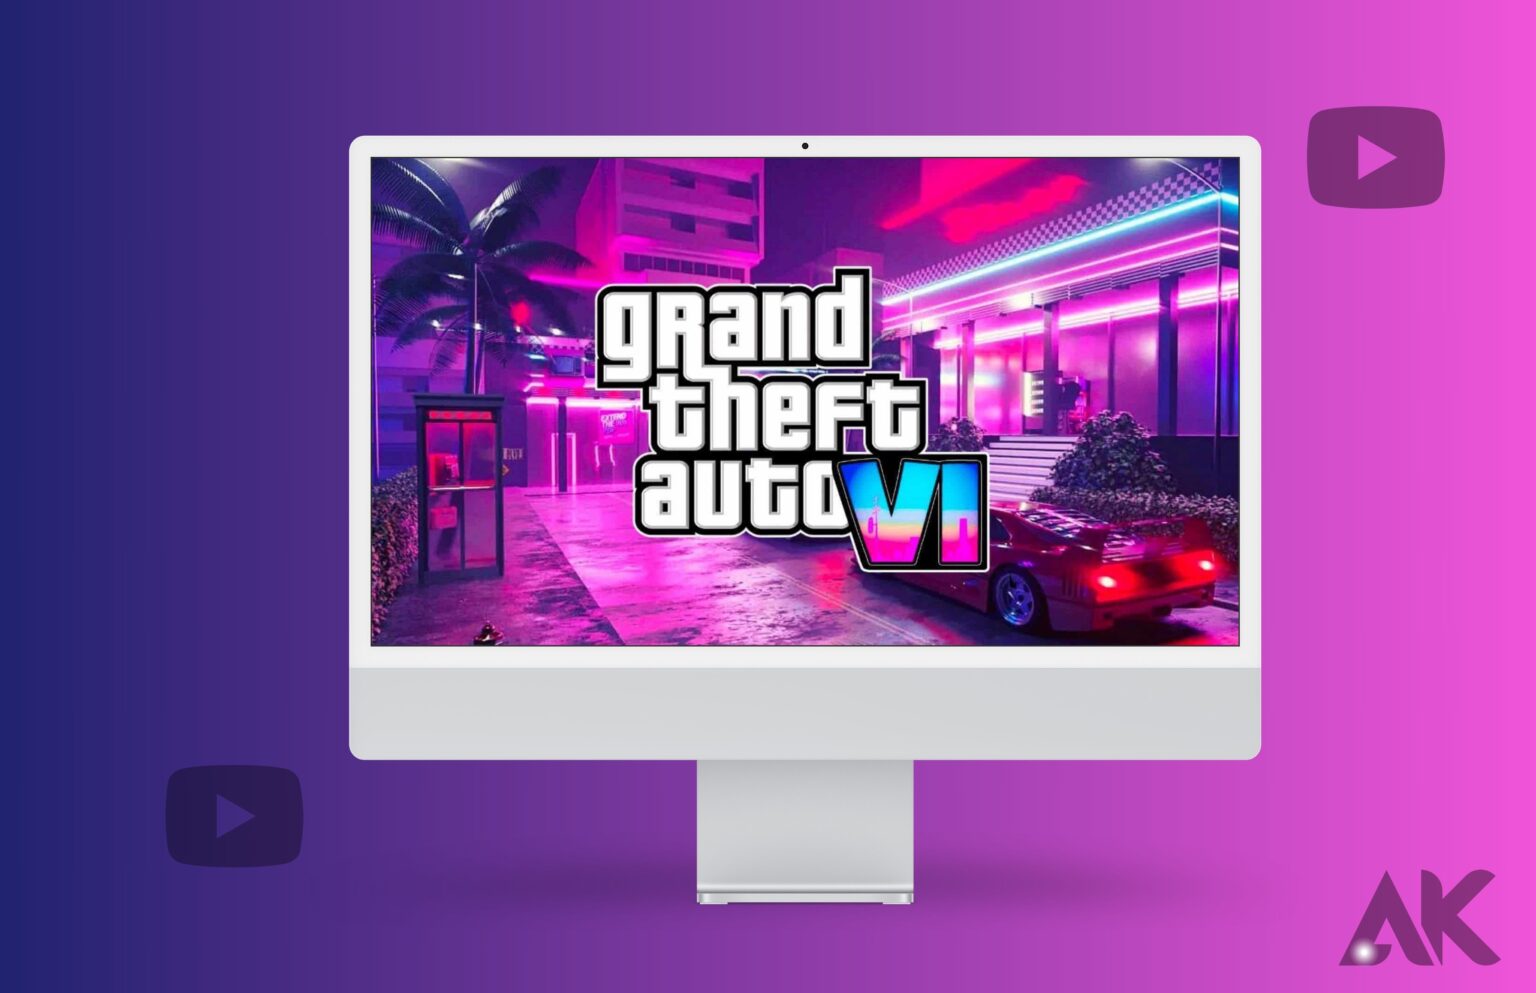 Where can I watch the GTA 6 trailer?